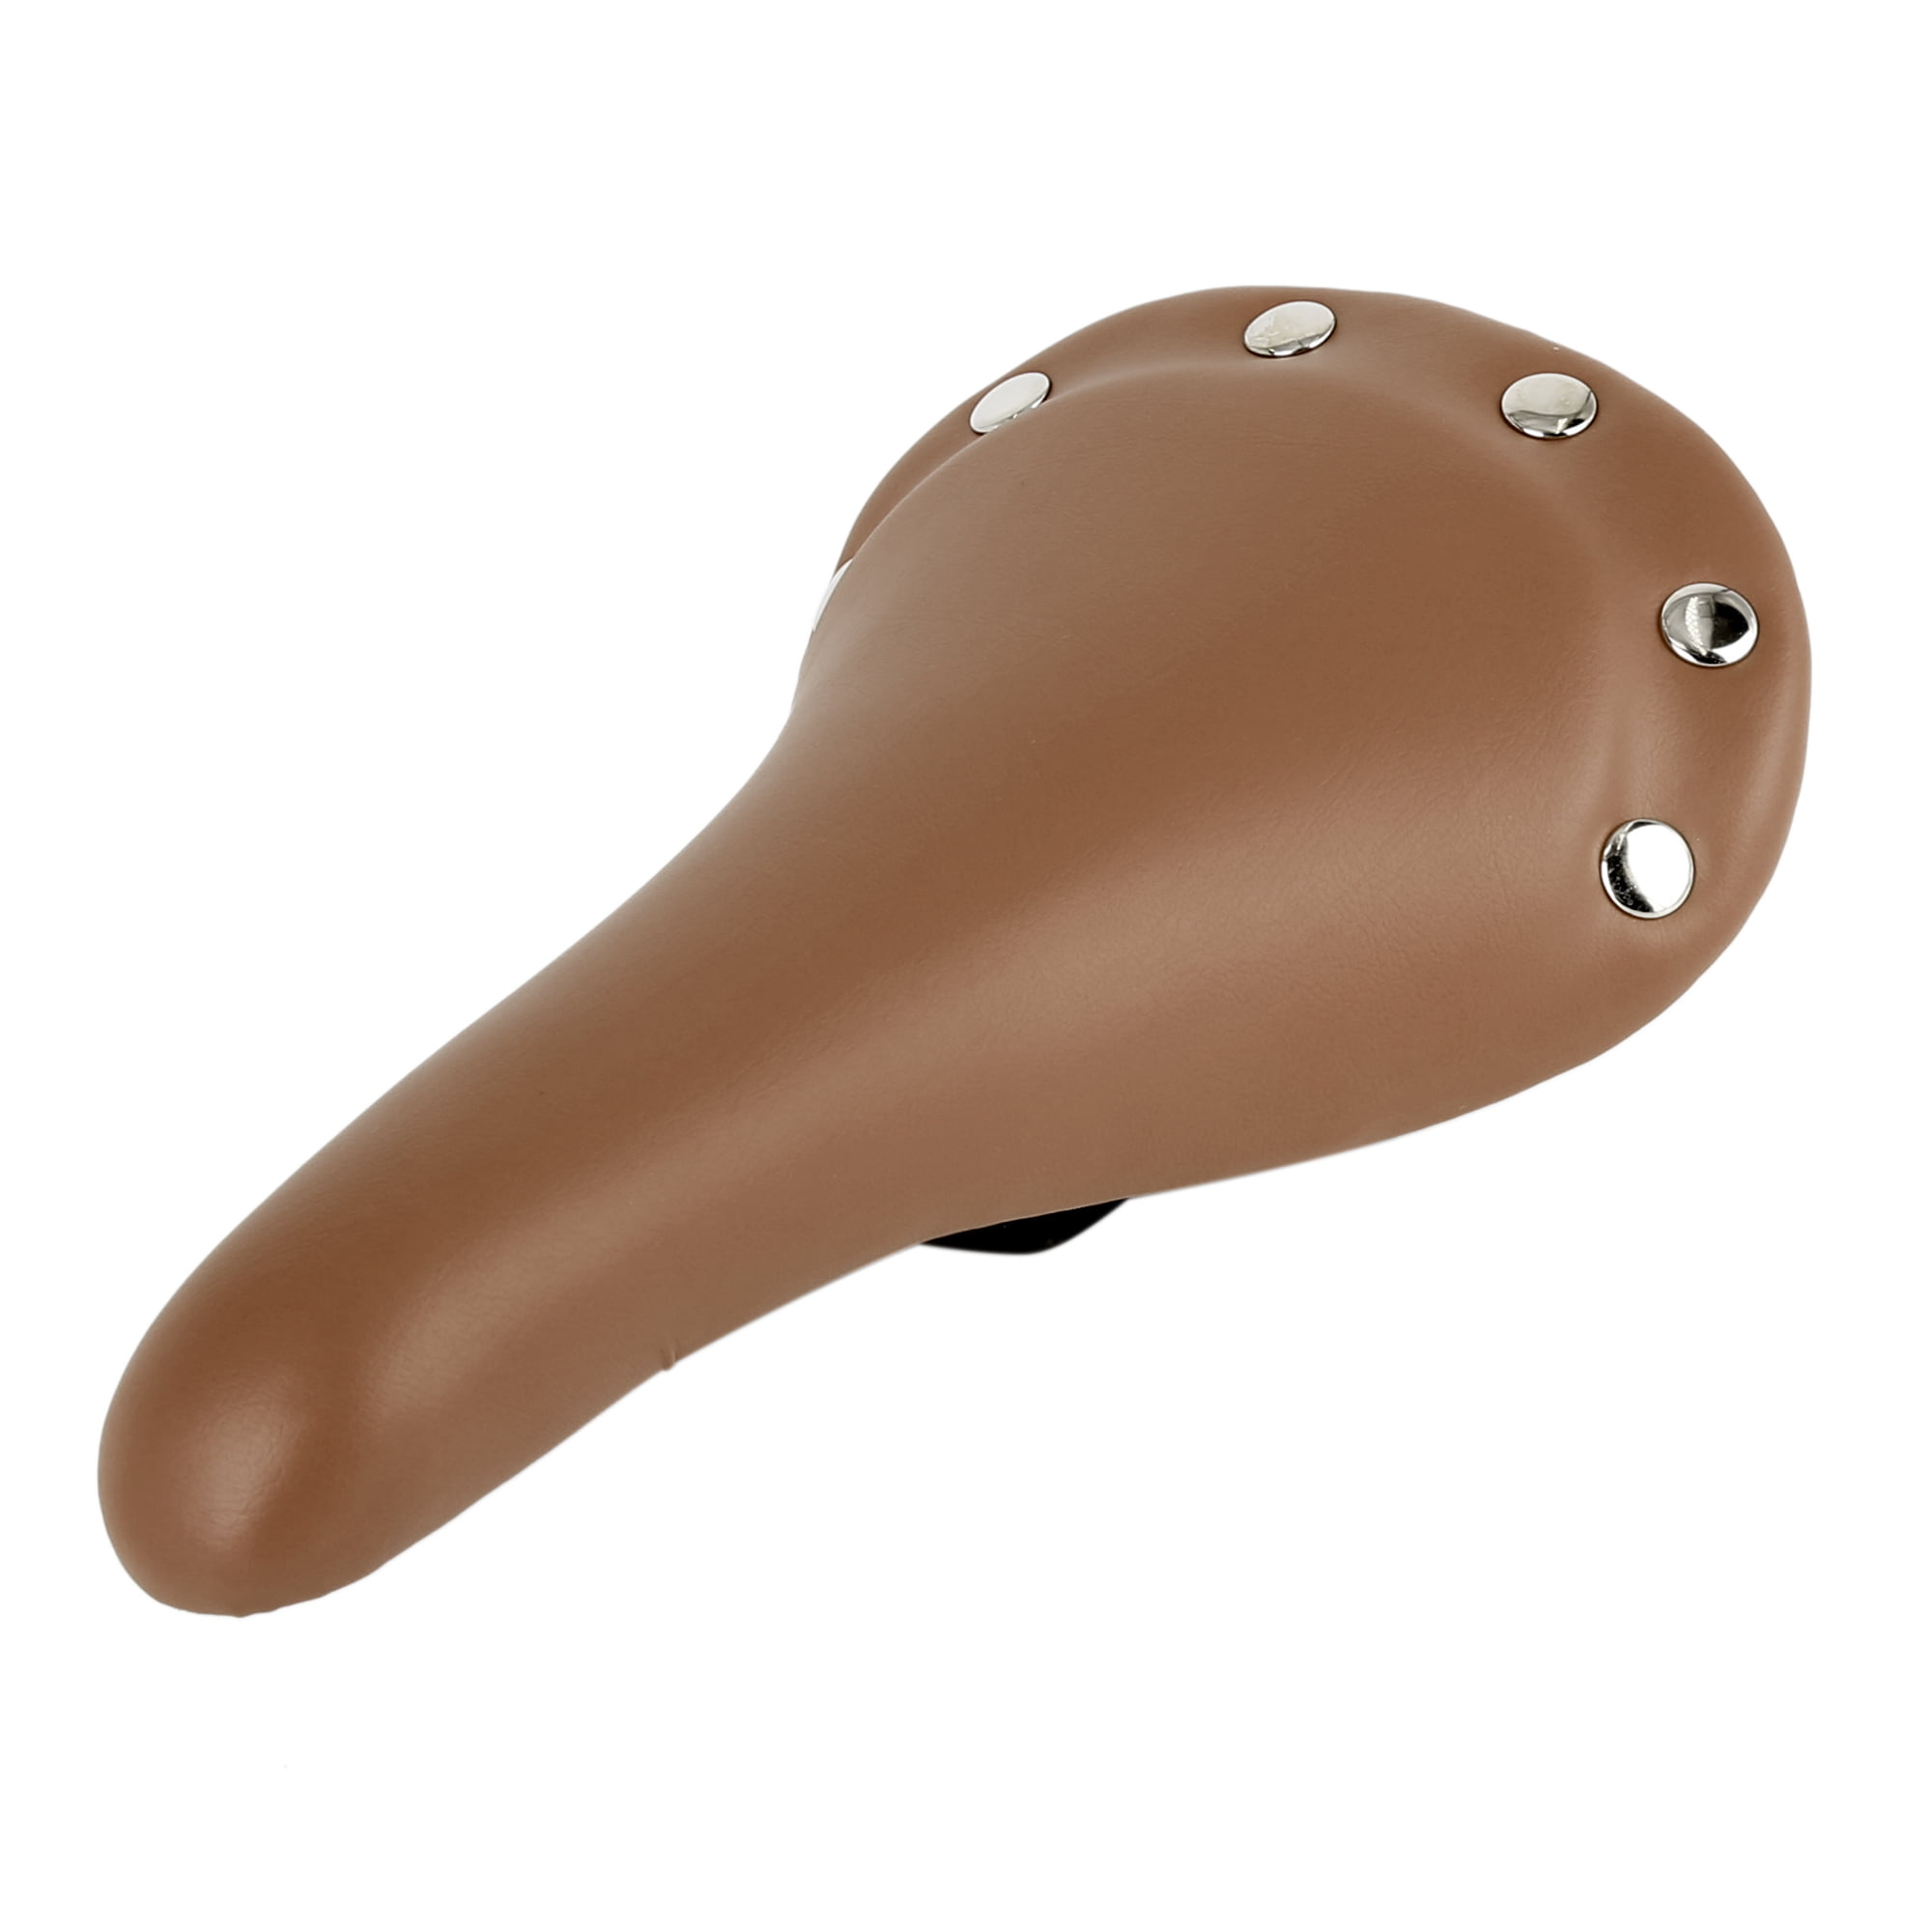 Details about   27x15x7cm Comfortable Bike Saddle Brown PU Leather Shallow Seat with Rivets 